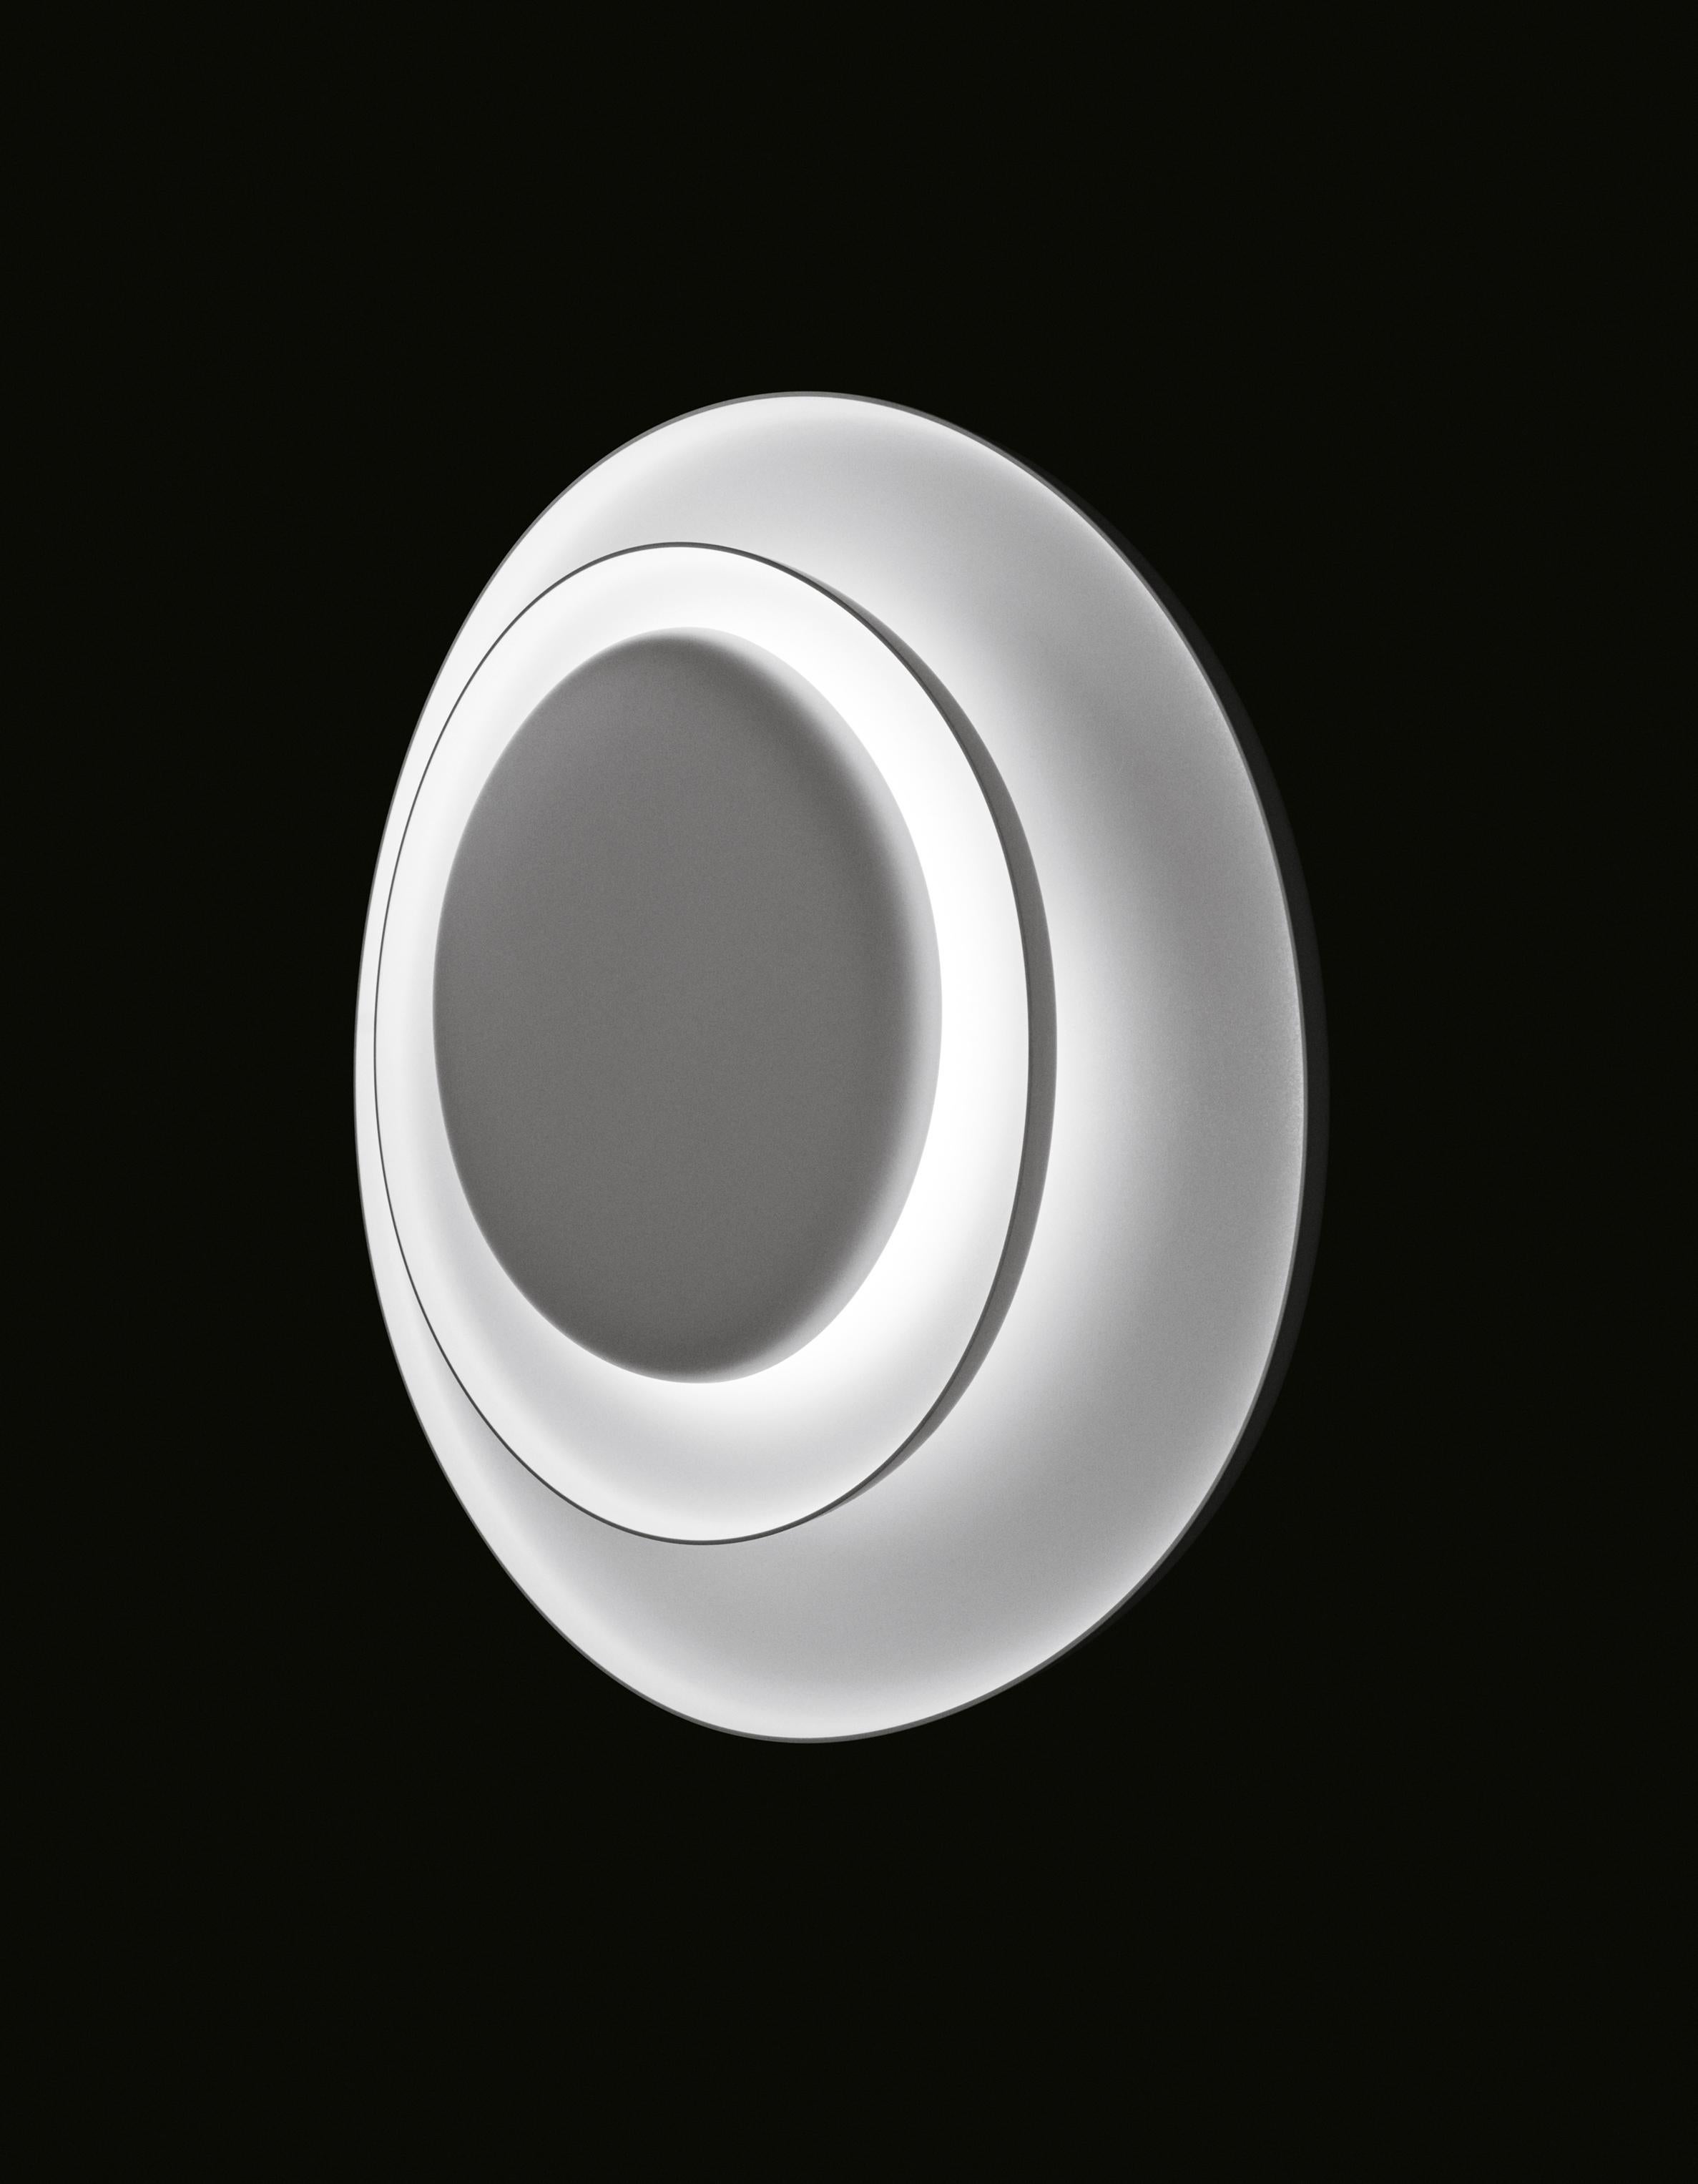 Wall lamp with reflected and diffused light. Consisting of three matt white injection molded polycarbonate egg-shaped plates and fitted together asymmetrically. The largest plate works as the wall mounting plate, and the two central plates conceal